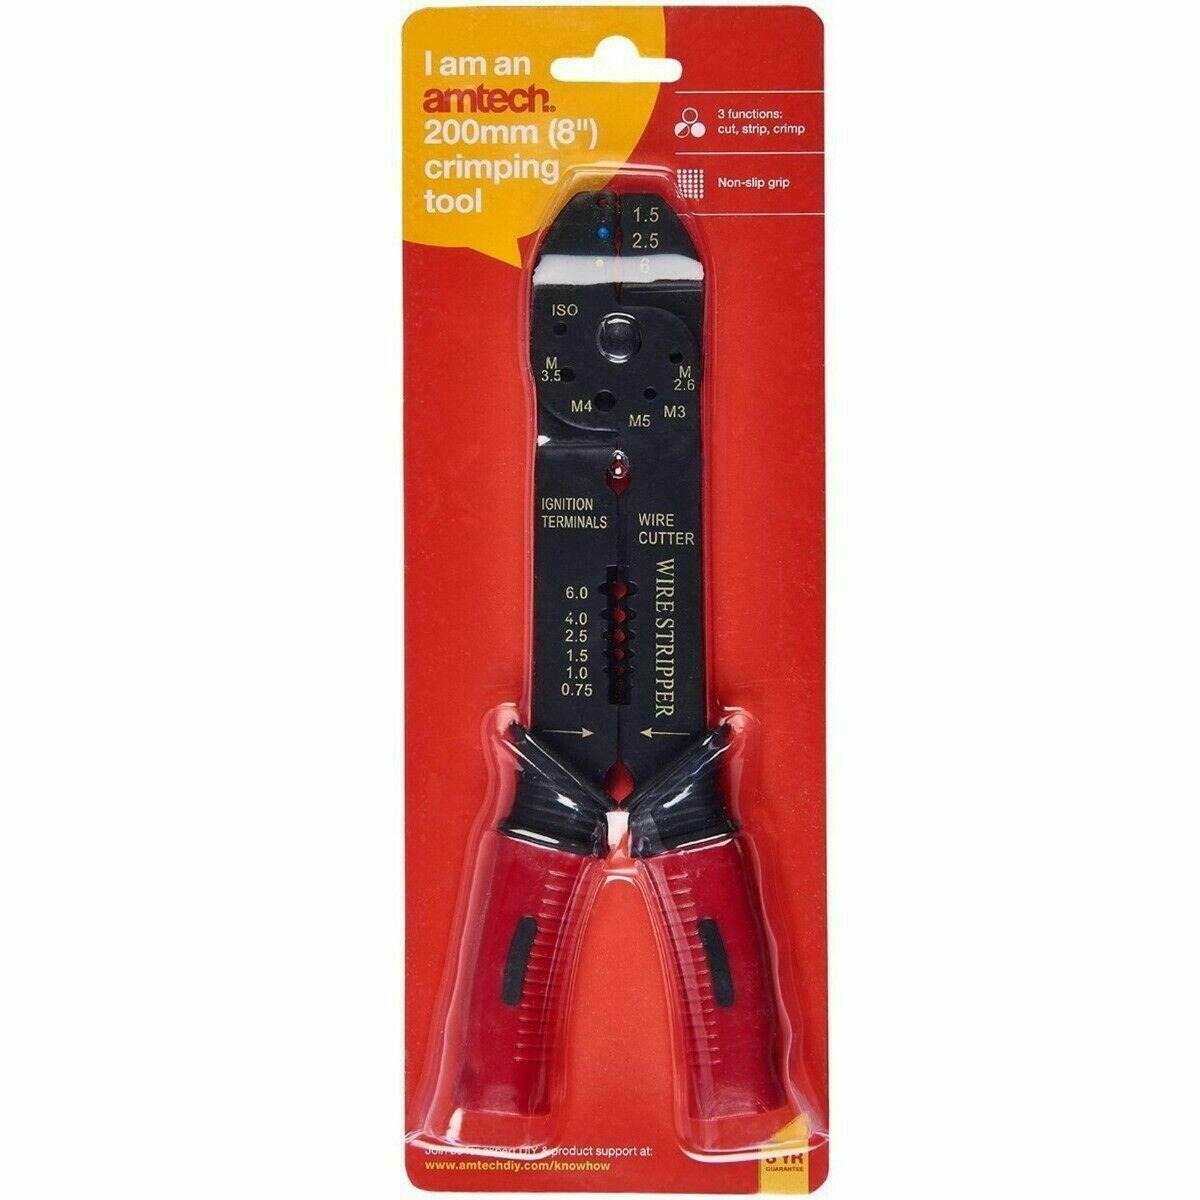 8-RED-CRIMPING-PLIERS-Cable-Cutter-Stripper-Electrical-Wire-Crimp-Hand-Tool.jpg